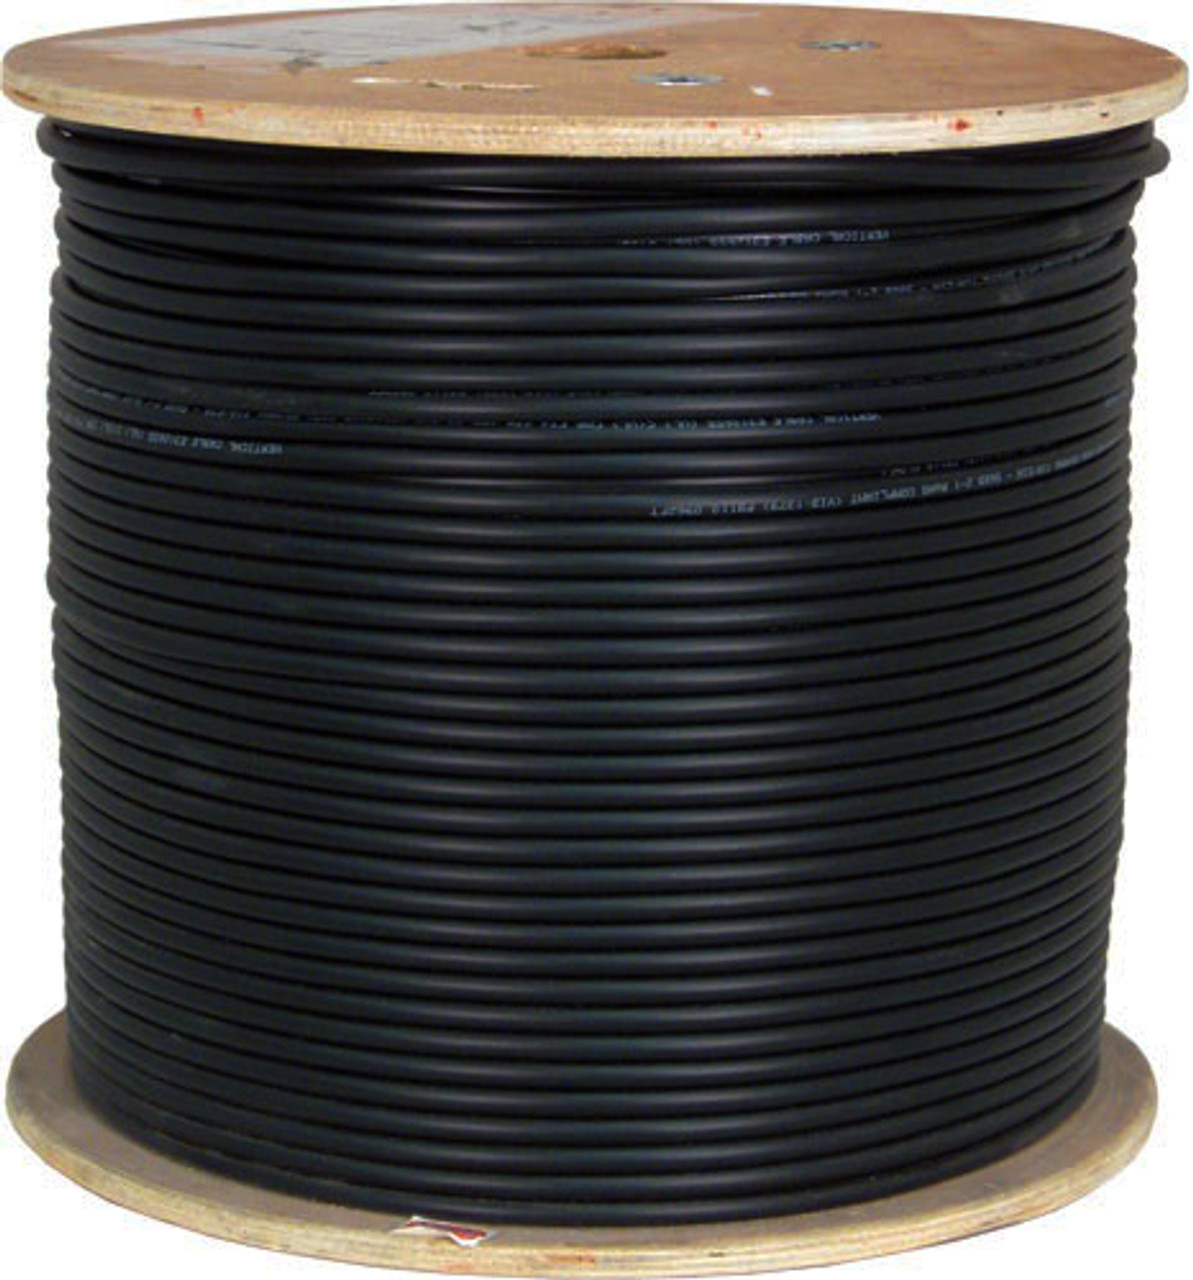 RG-6 Direct Burial Coax Cable for CATV